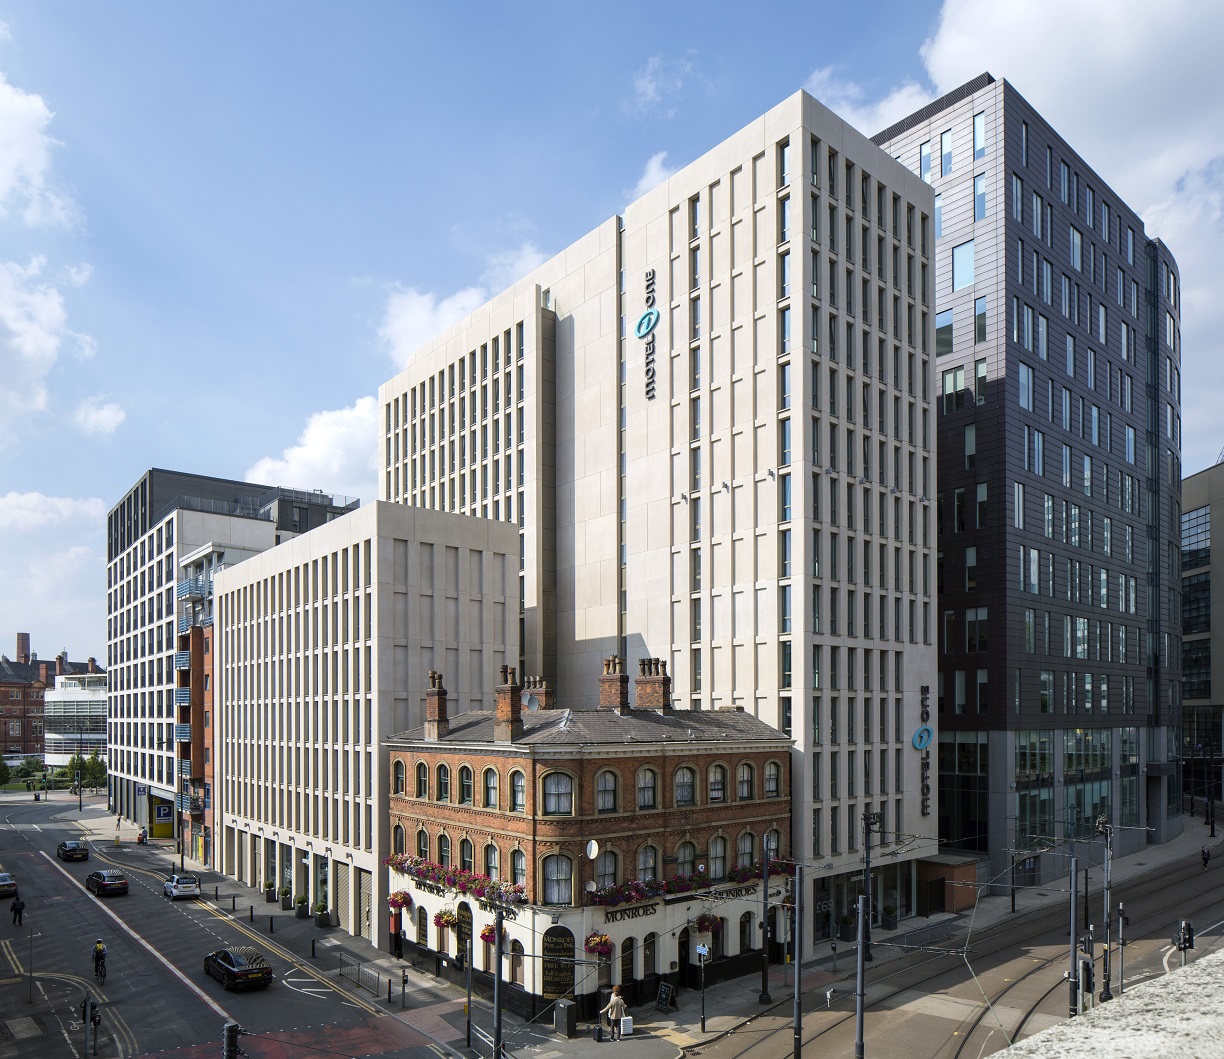 Motel One Manchester. Image by Peter Cook